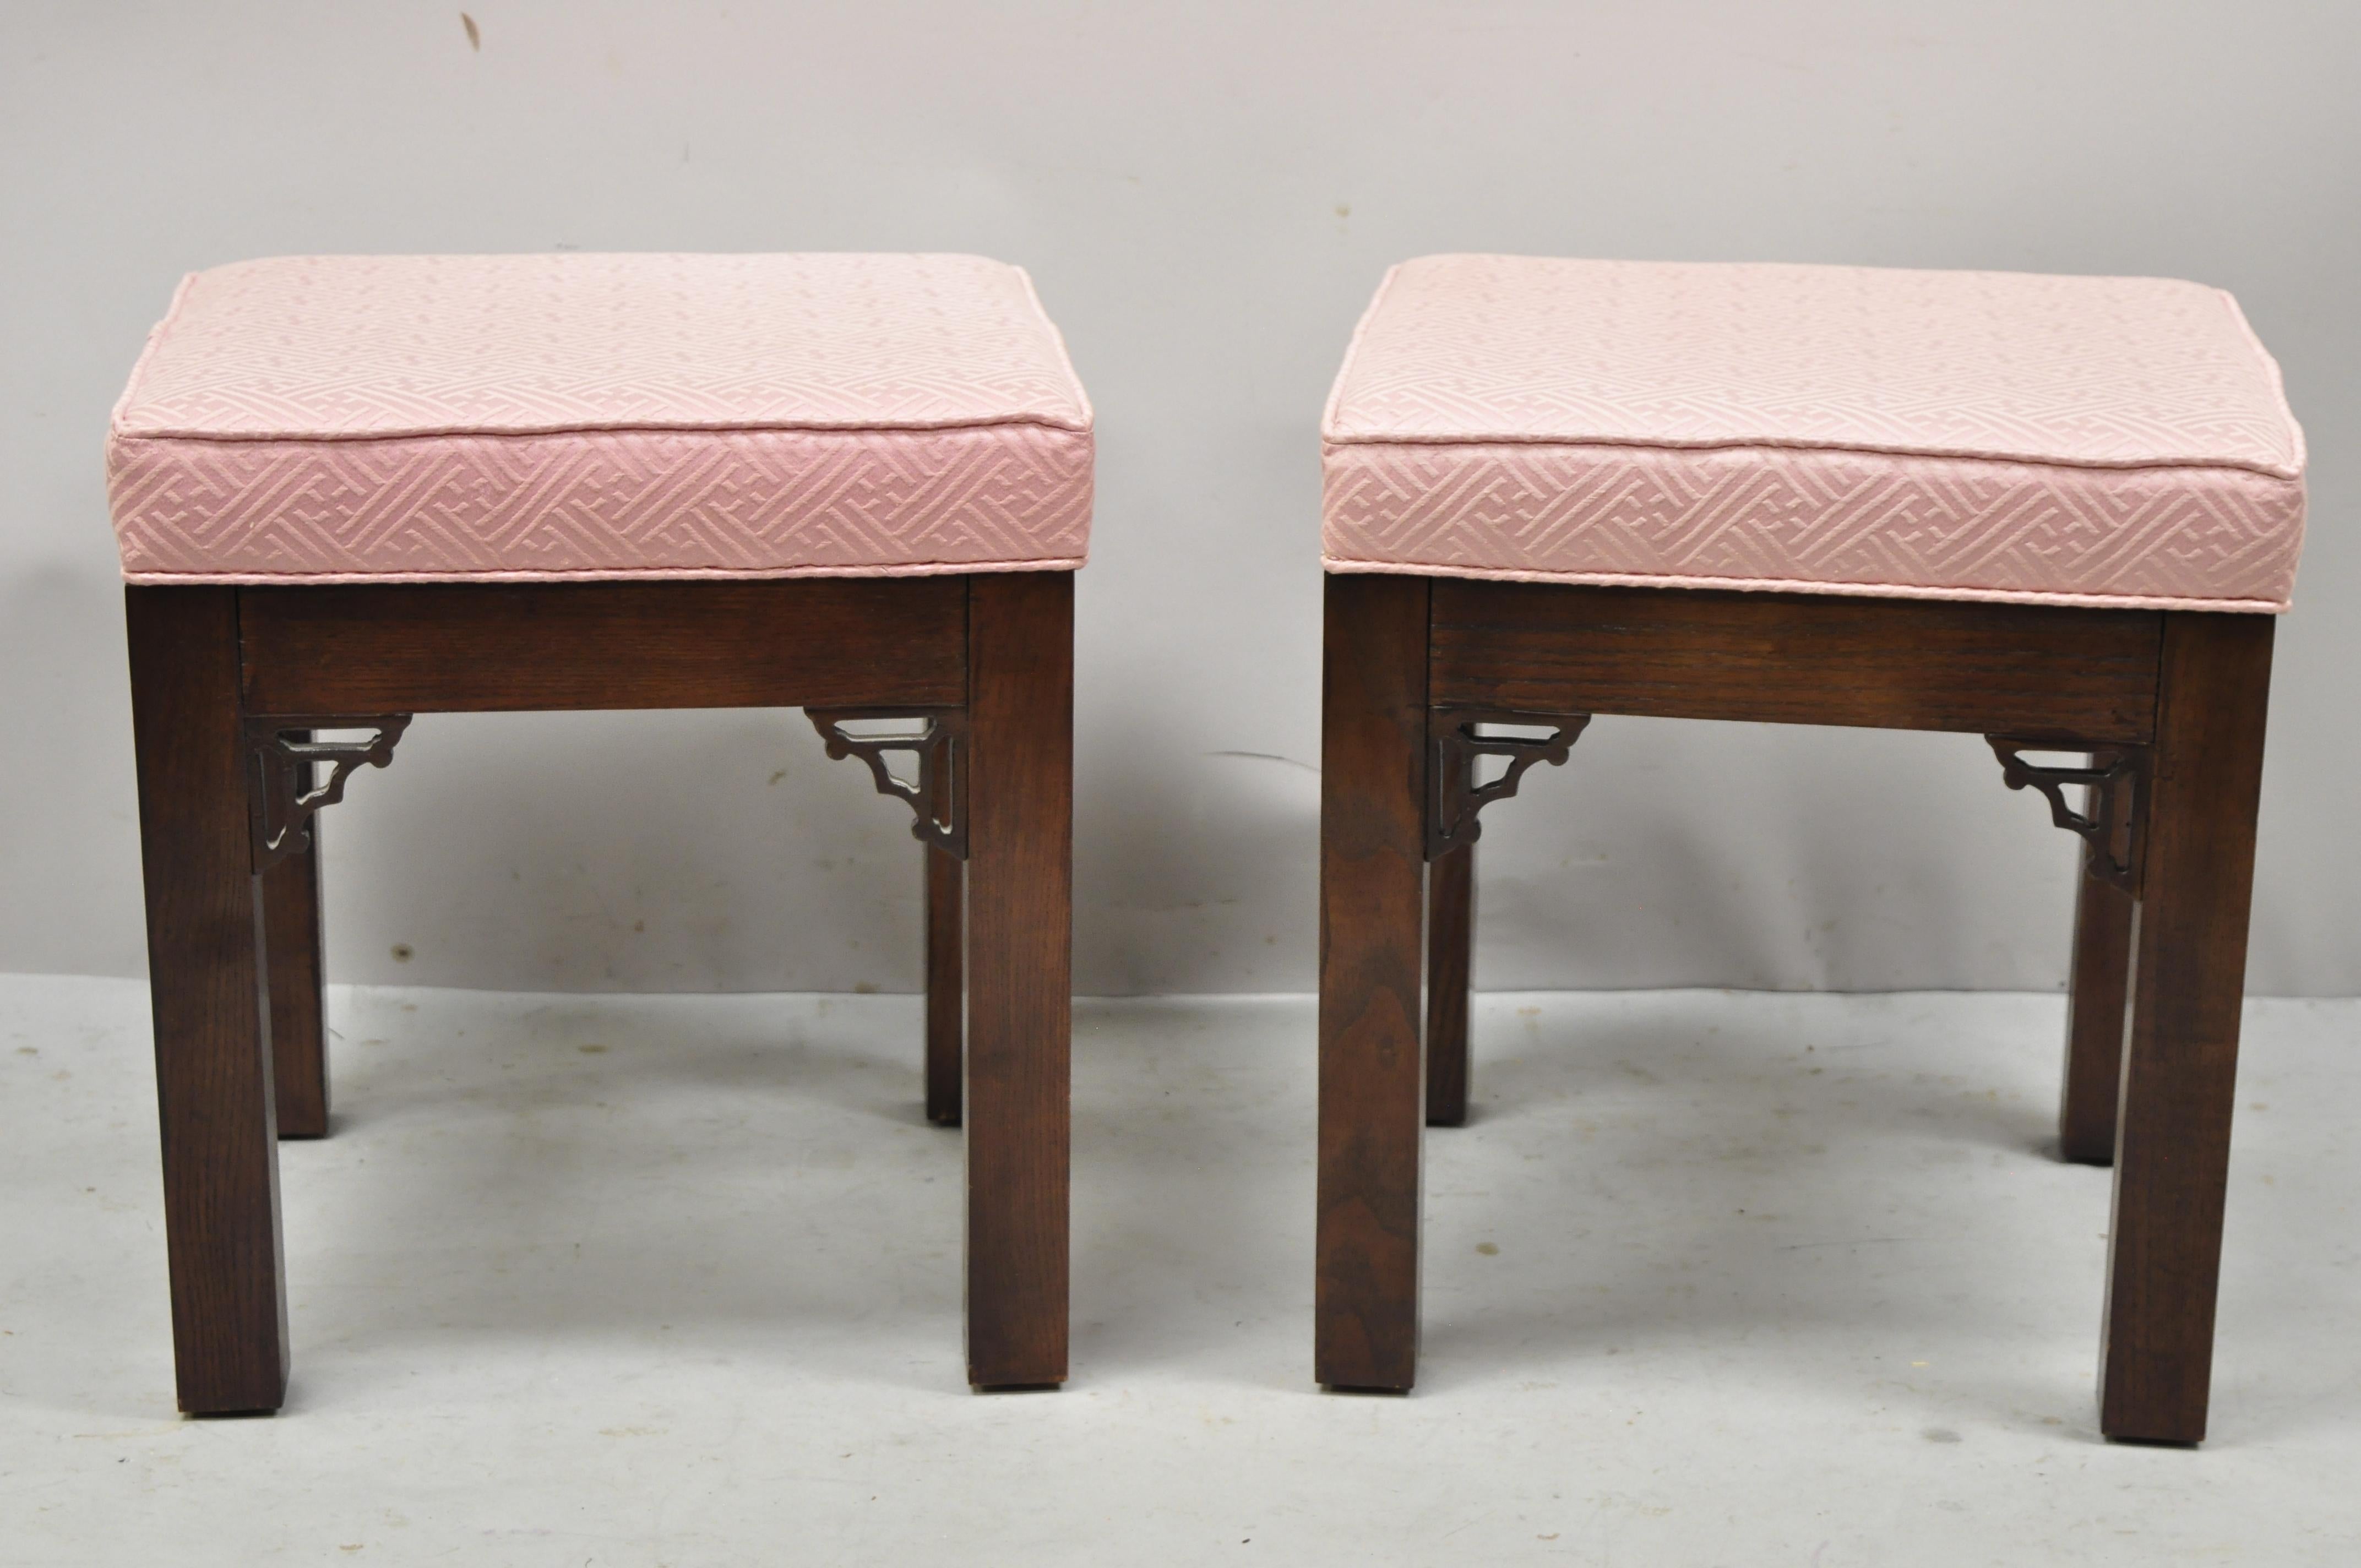 Vintage Chinese chippendale carved fretwork square pink upholstered stools ottoman - a pair. Item features pink upholstered square box seat, carved fretwork corners, solid wood construction, very nice vintage pair, quality American craftsmanship,